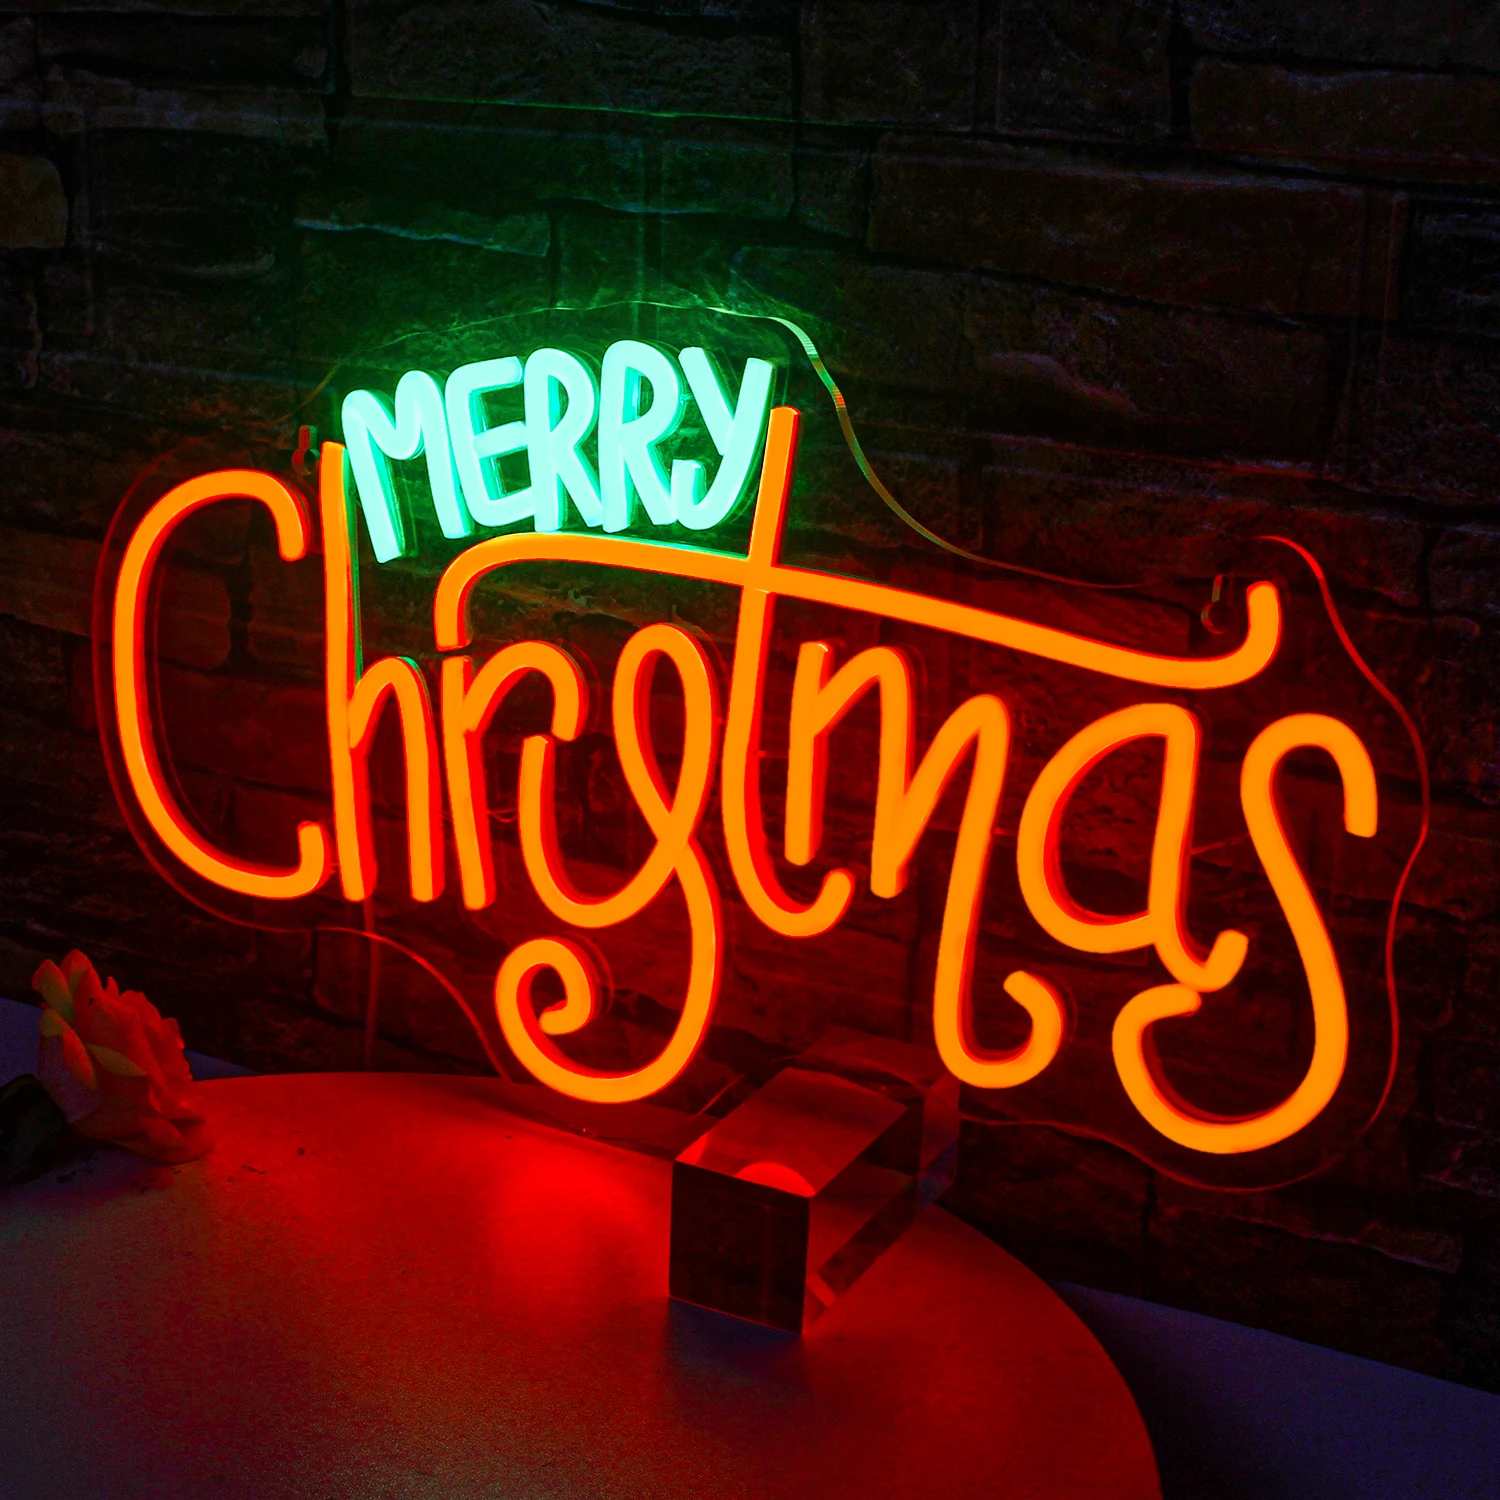 Merry Christmas Neon Sign Led Neon Light Wall Decor Usb Light Up Sign Bedroom Home Party Christmas Decorations Family Kids Gifts merry christmas neon sign led neon light wall decor usb light up sign bedroom home party christmas decorations family kids gifts